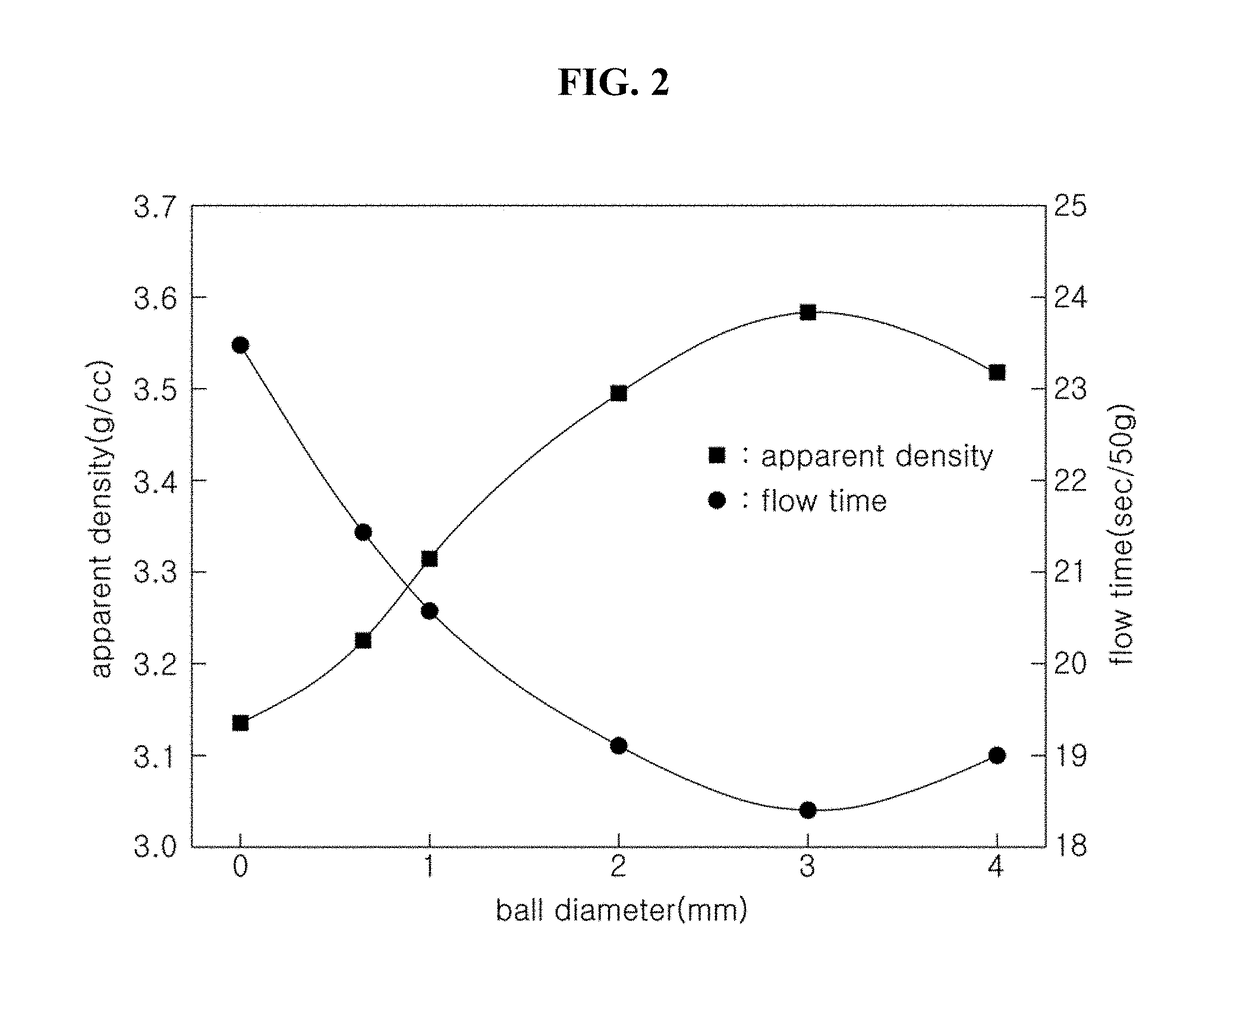 Method of producing soft magnetic powder